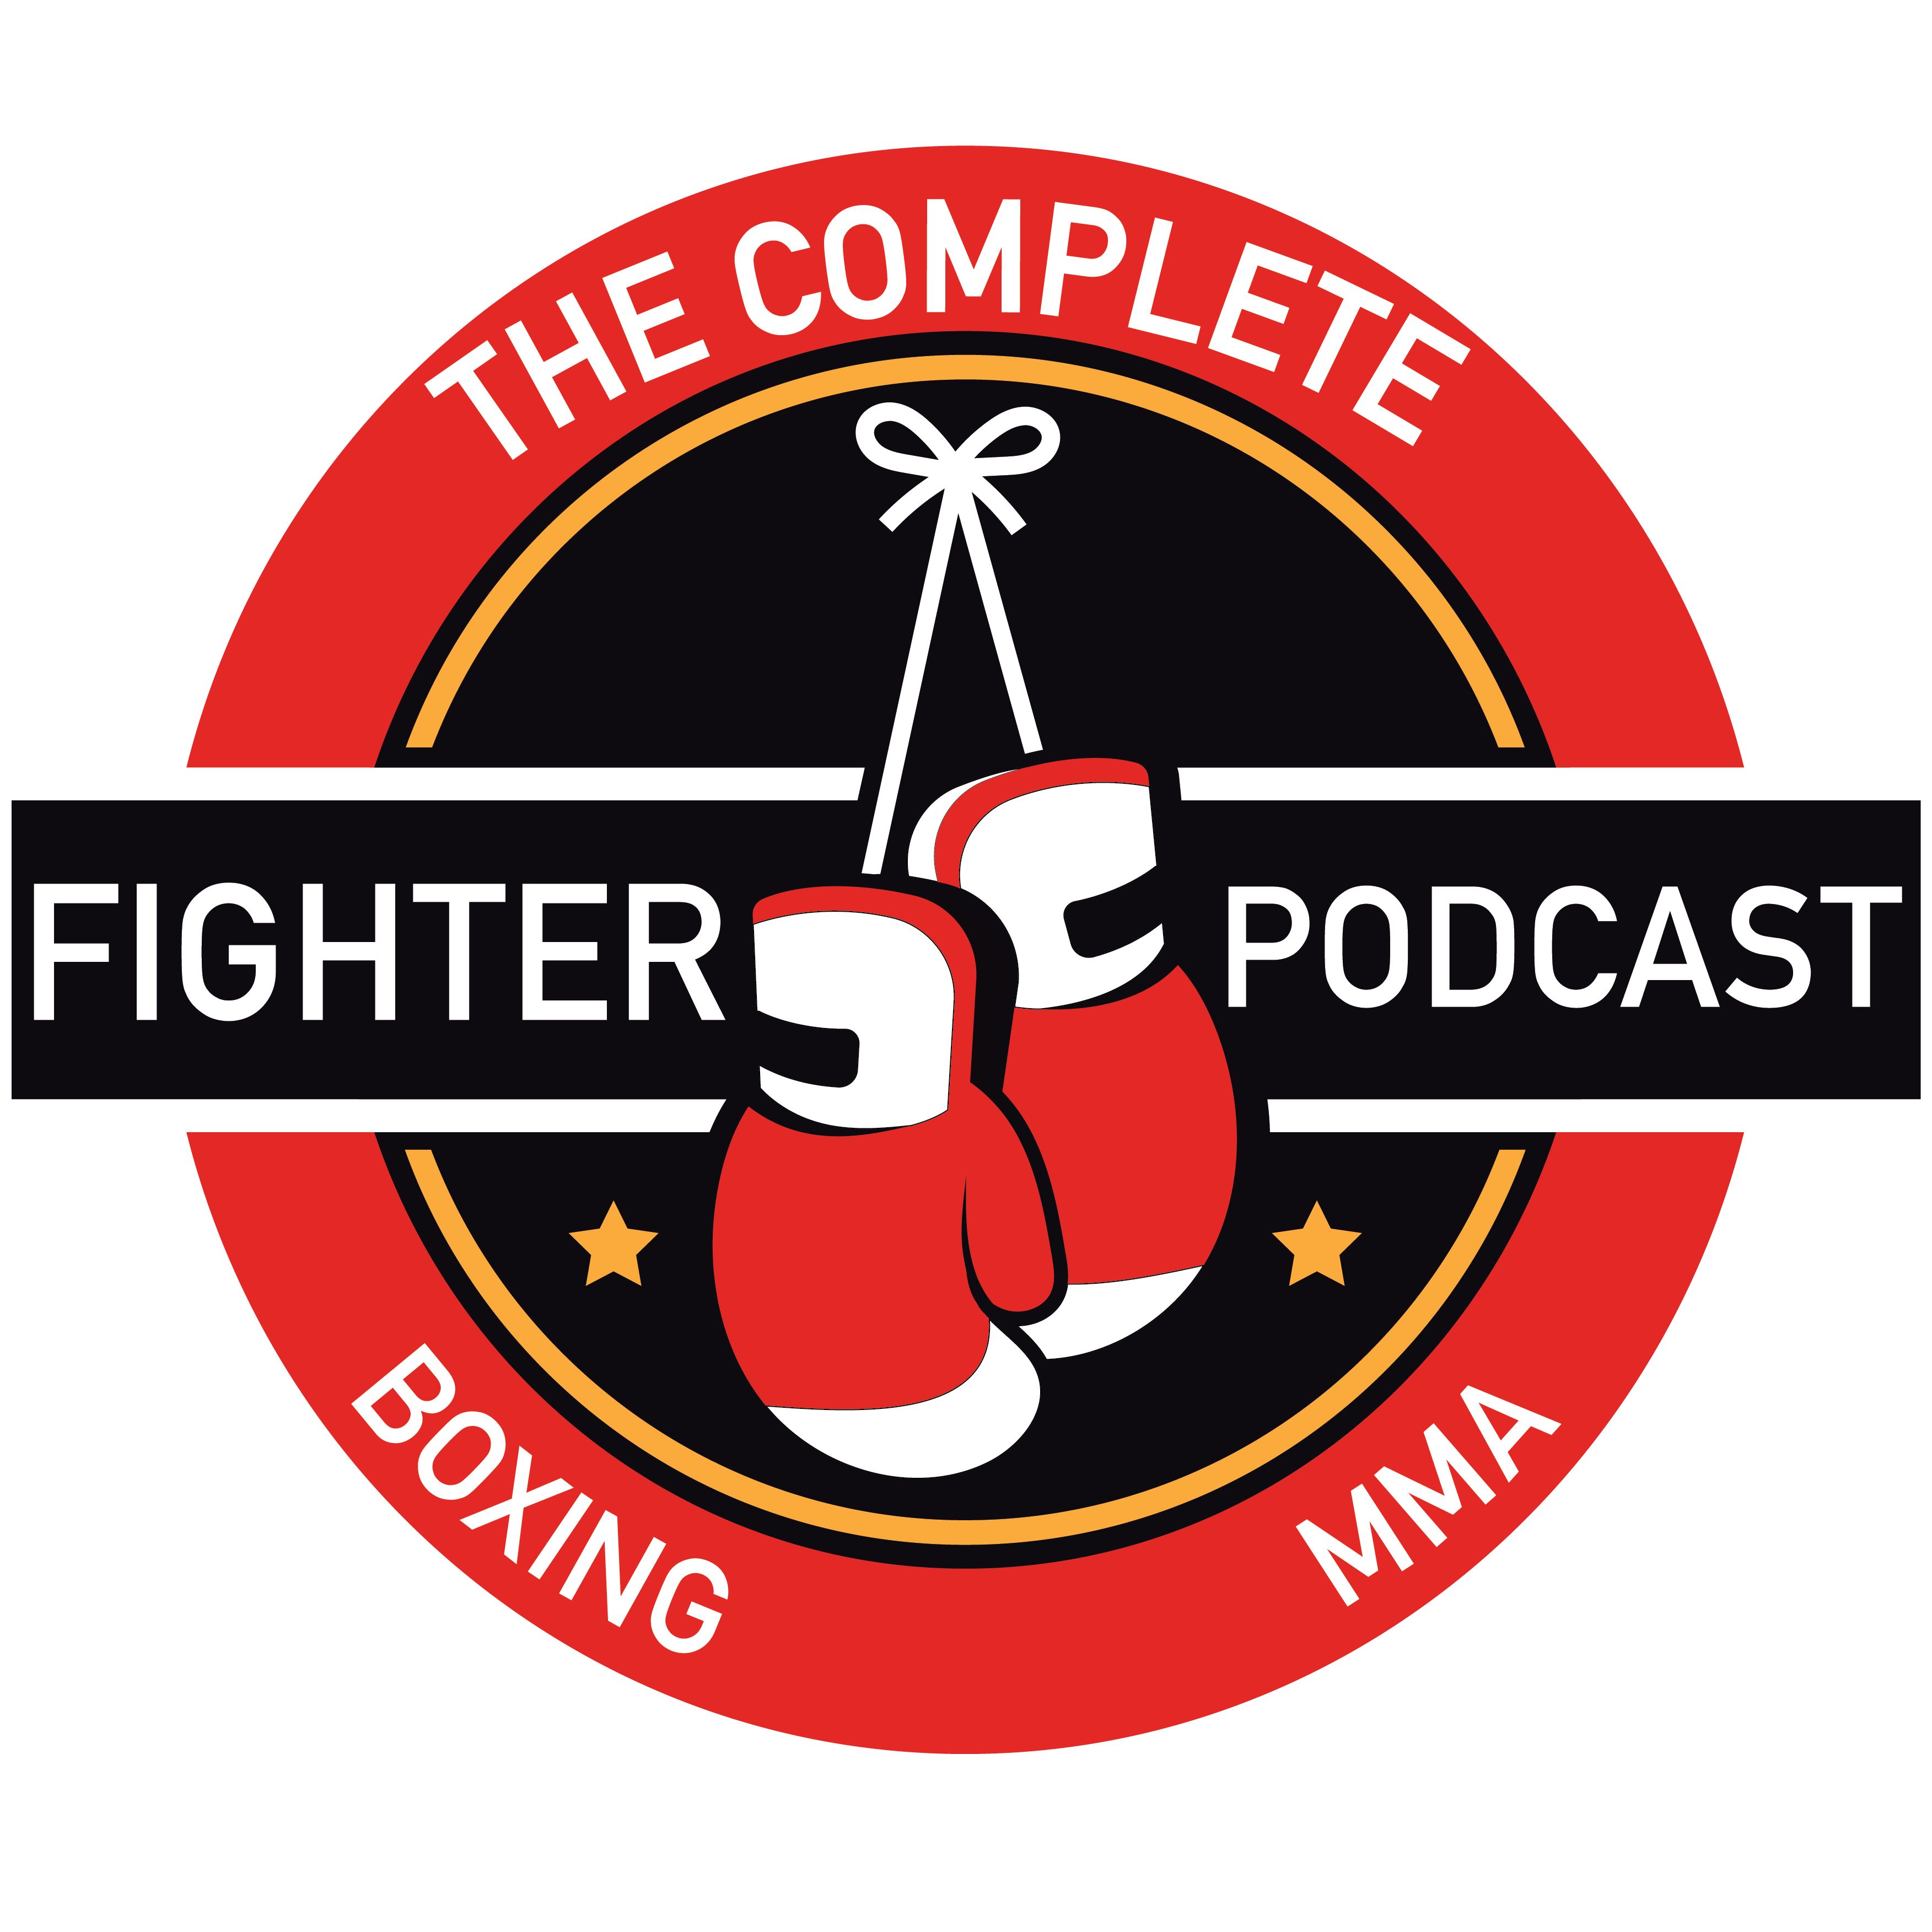 Stream Complete Fighter Podcast Listen to podcast episodes online for free on SoundCloud